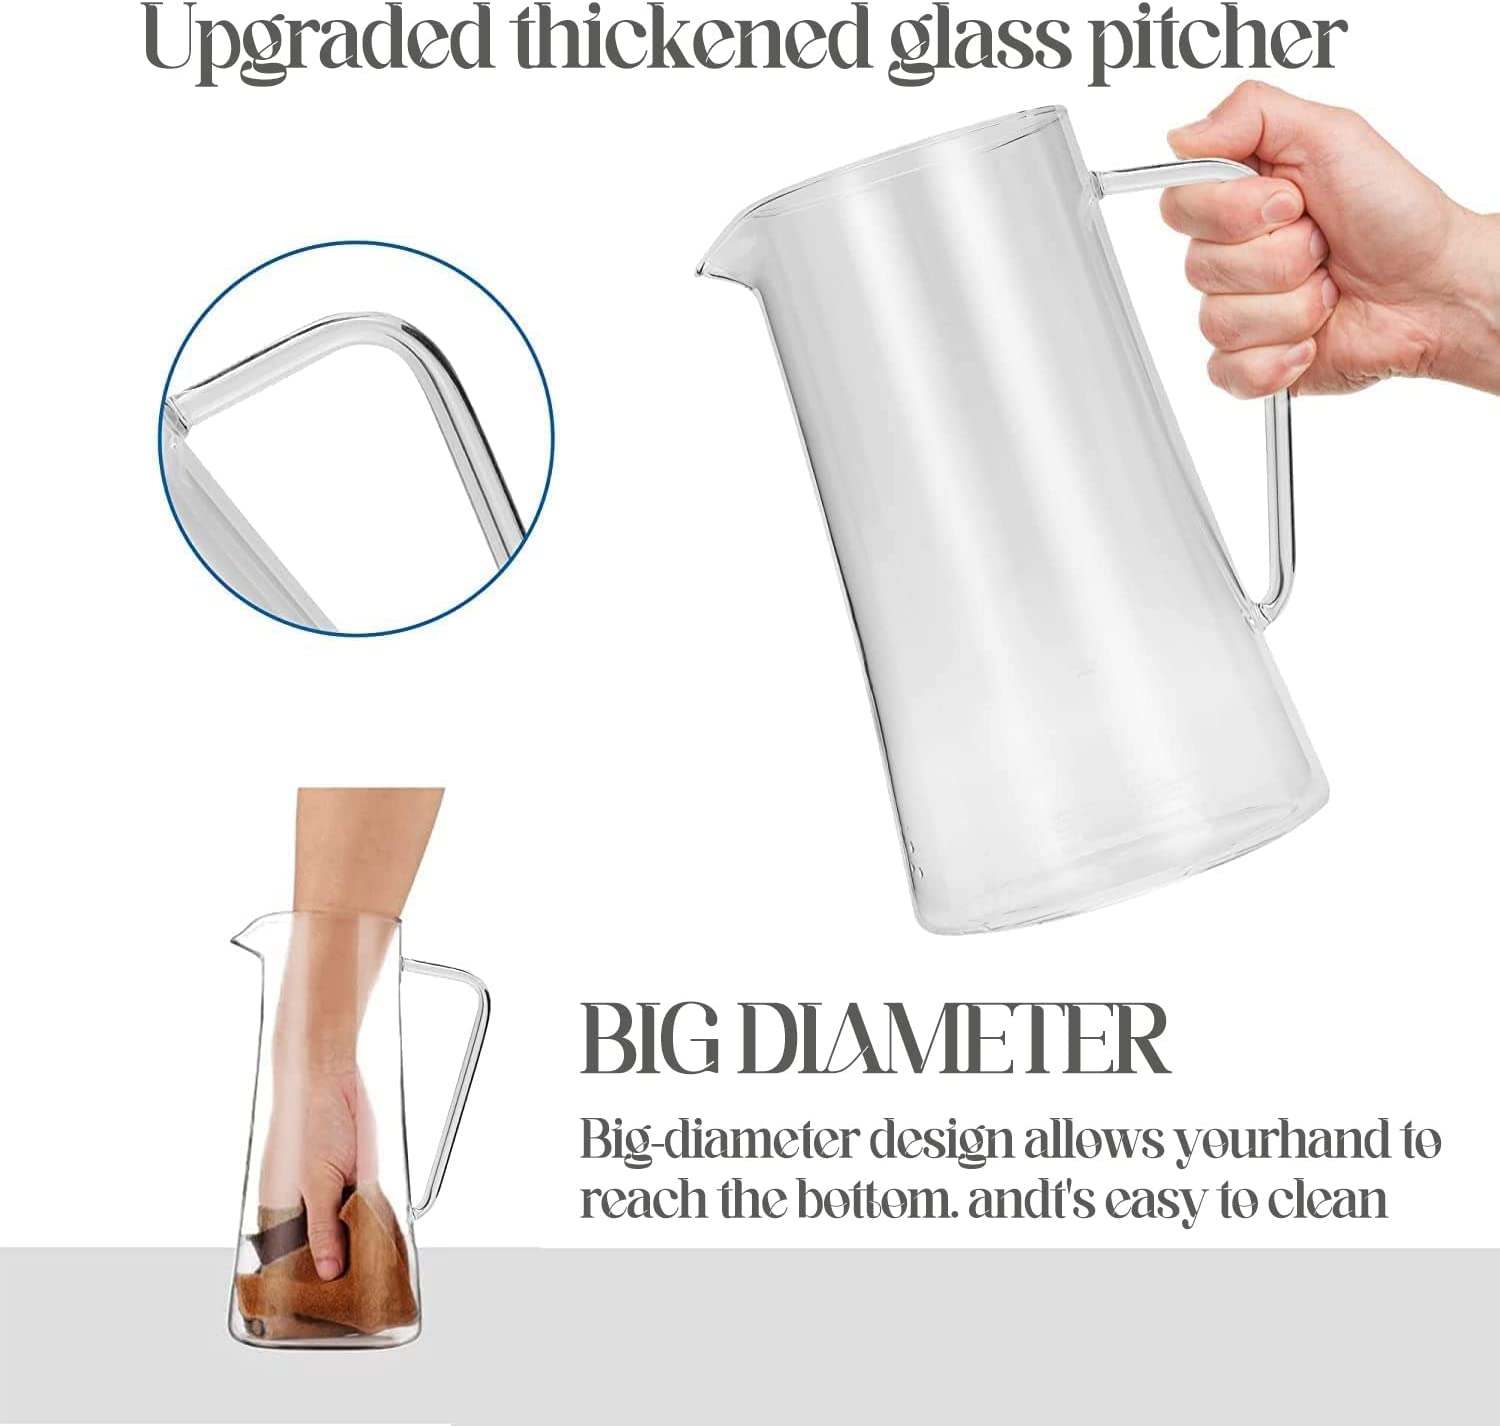 Water Pitcher Juice Pitcher Thickened Tea Infuser Pitcher Ice Tea Pitcher 